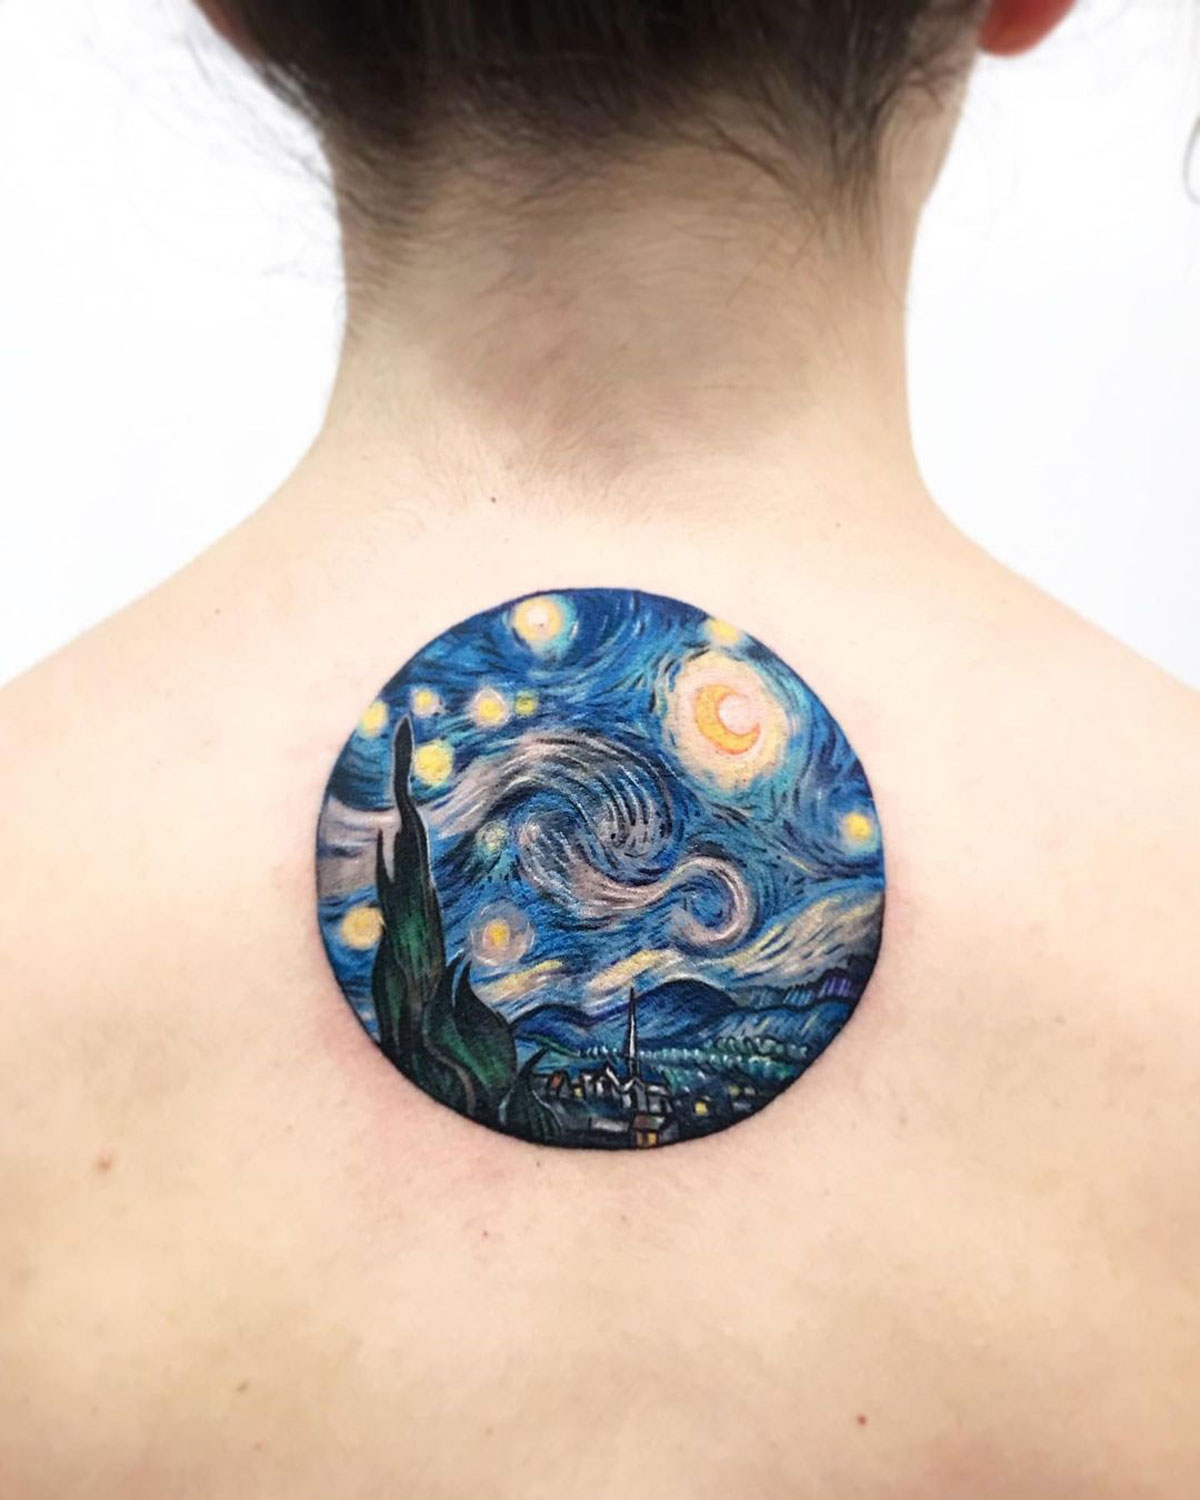 A tattoo inspired by Van Gogh's The Starry Night painting.